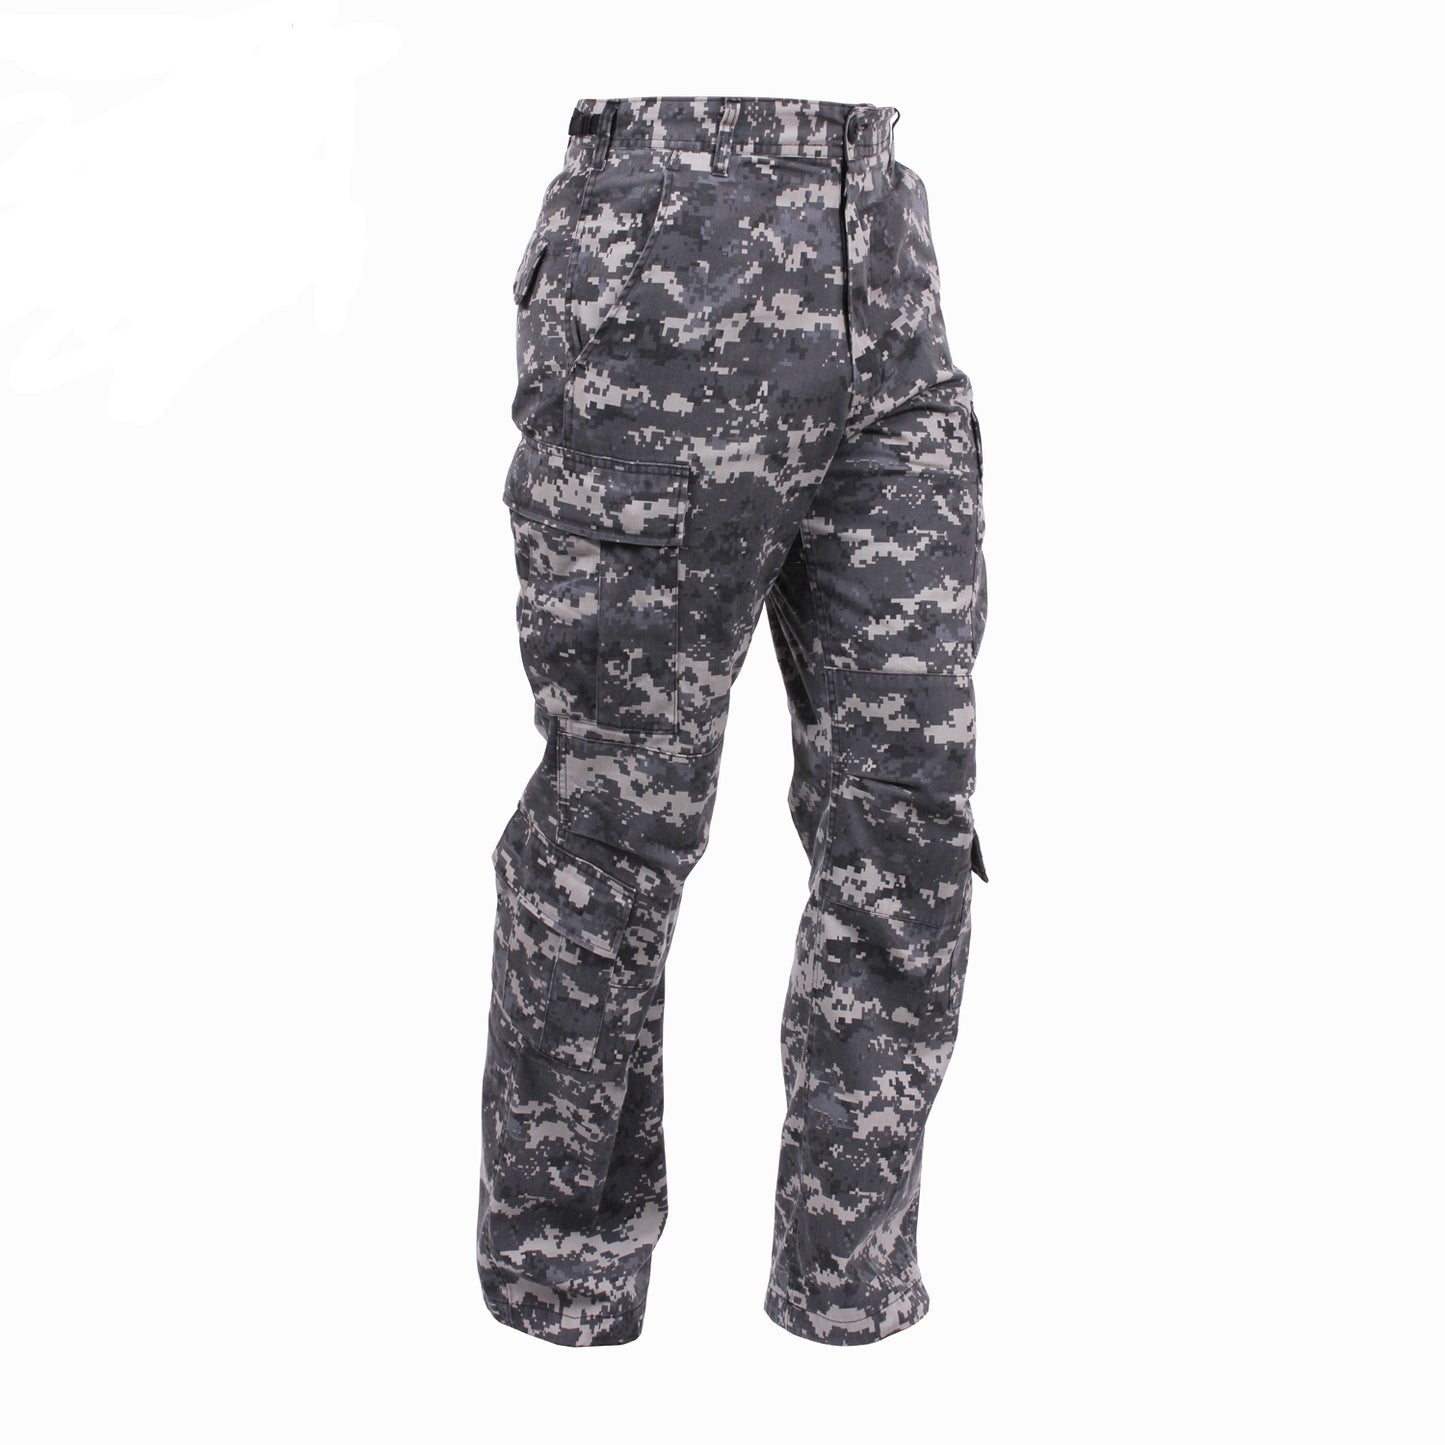 Sanbonepd Womens Retro Cargo Pants With Pockets Outdoor Casual Camo  Construction Work Pants